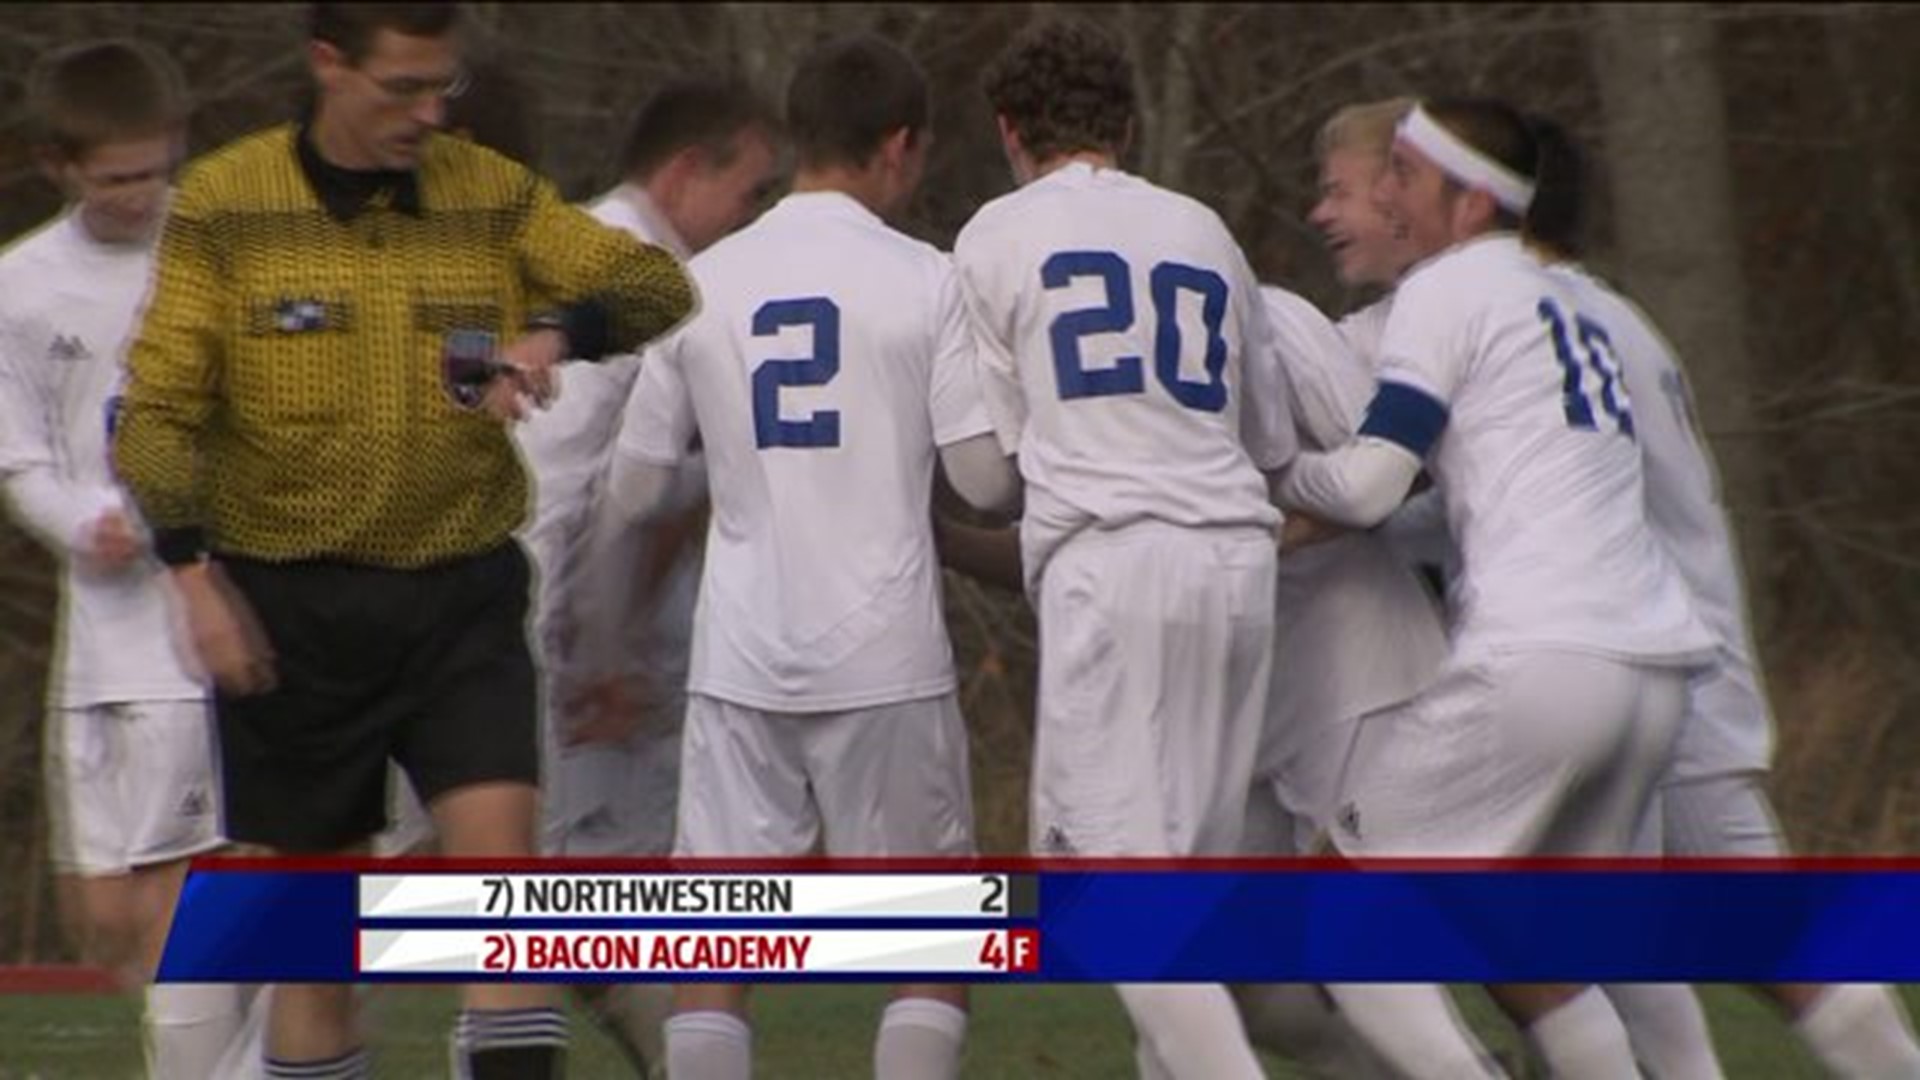 Soccer highlights: Bacon Academy advances to semifinals